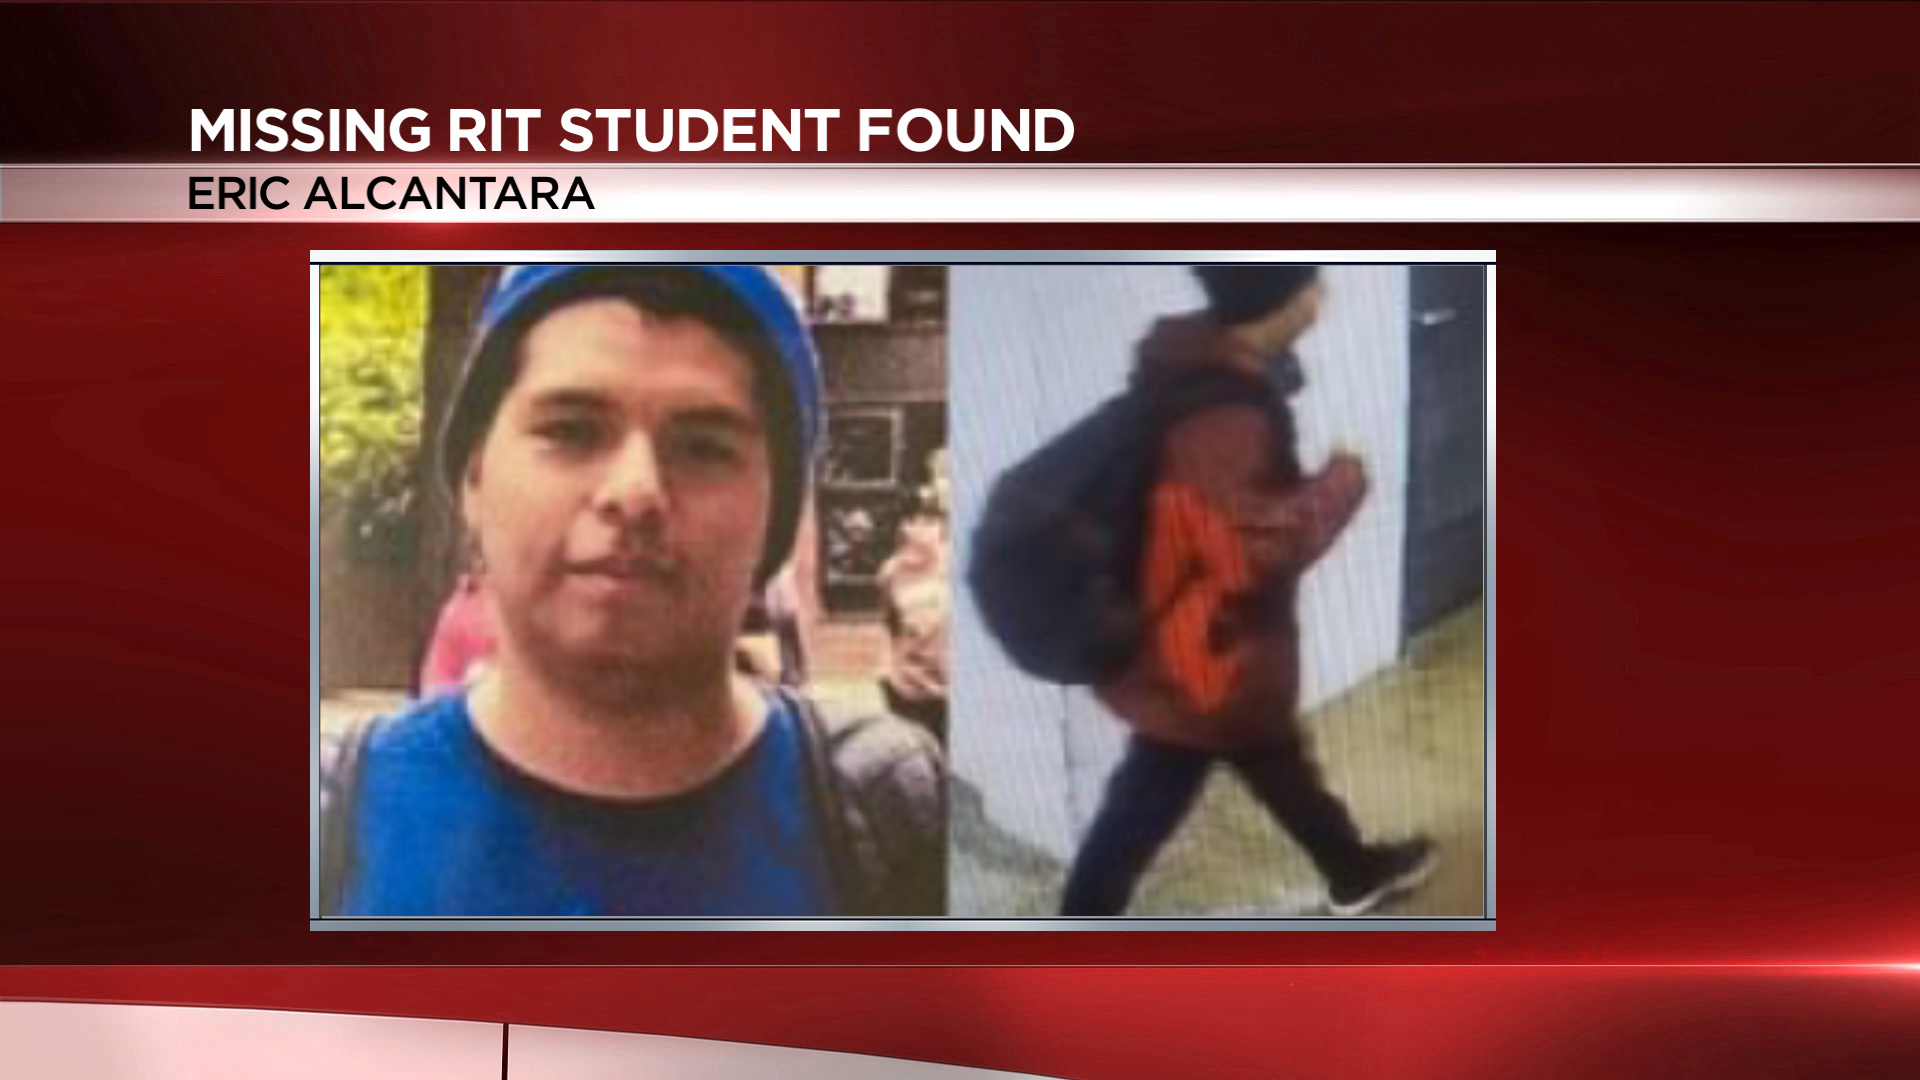 UPDATE Missing RIT student has been found safe